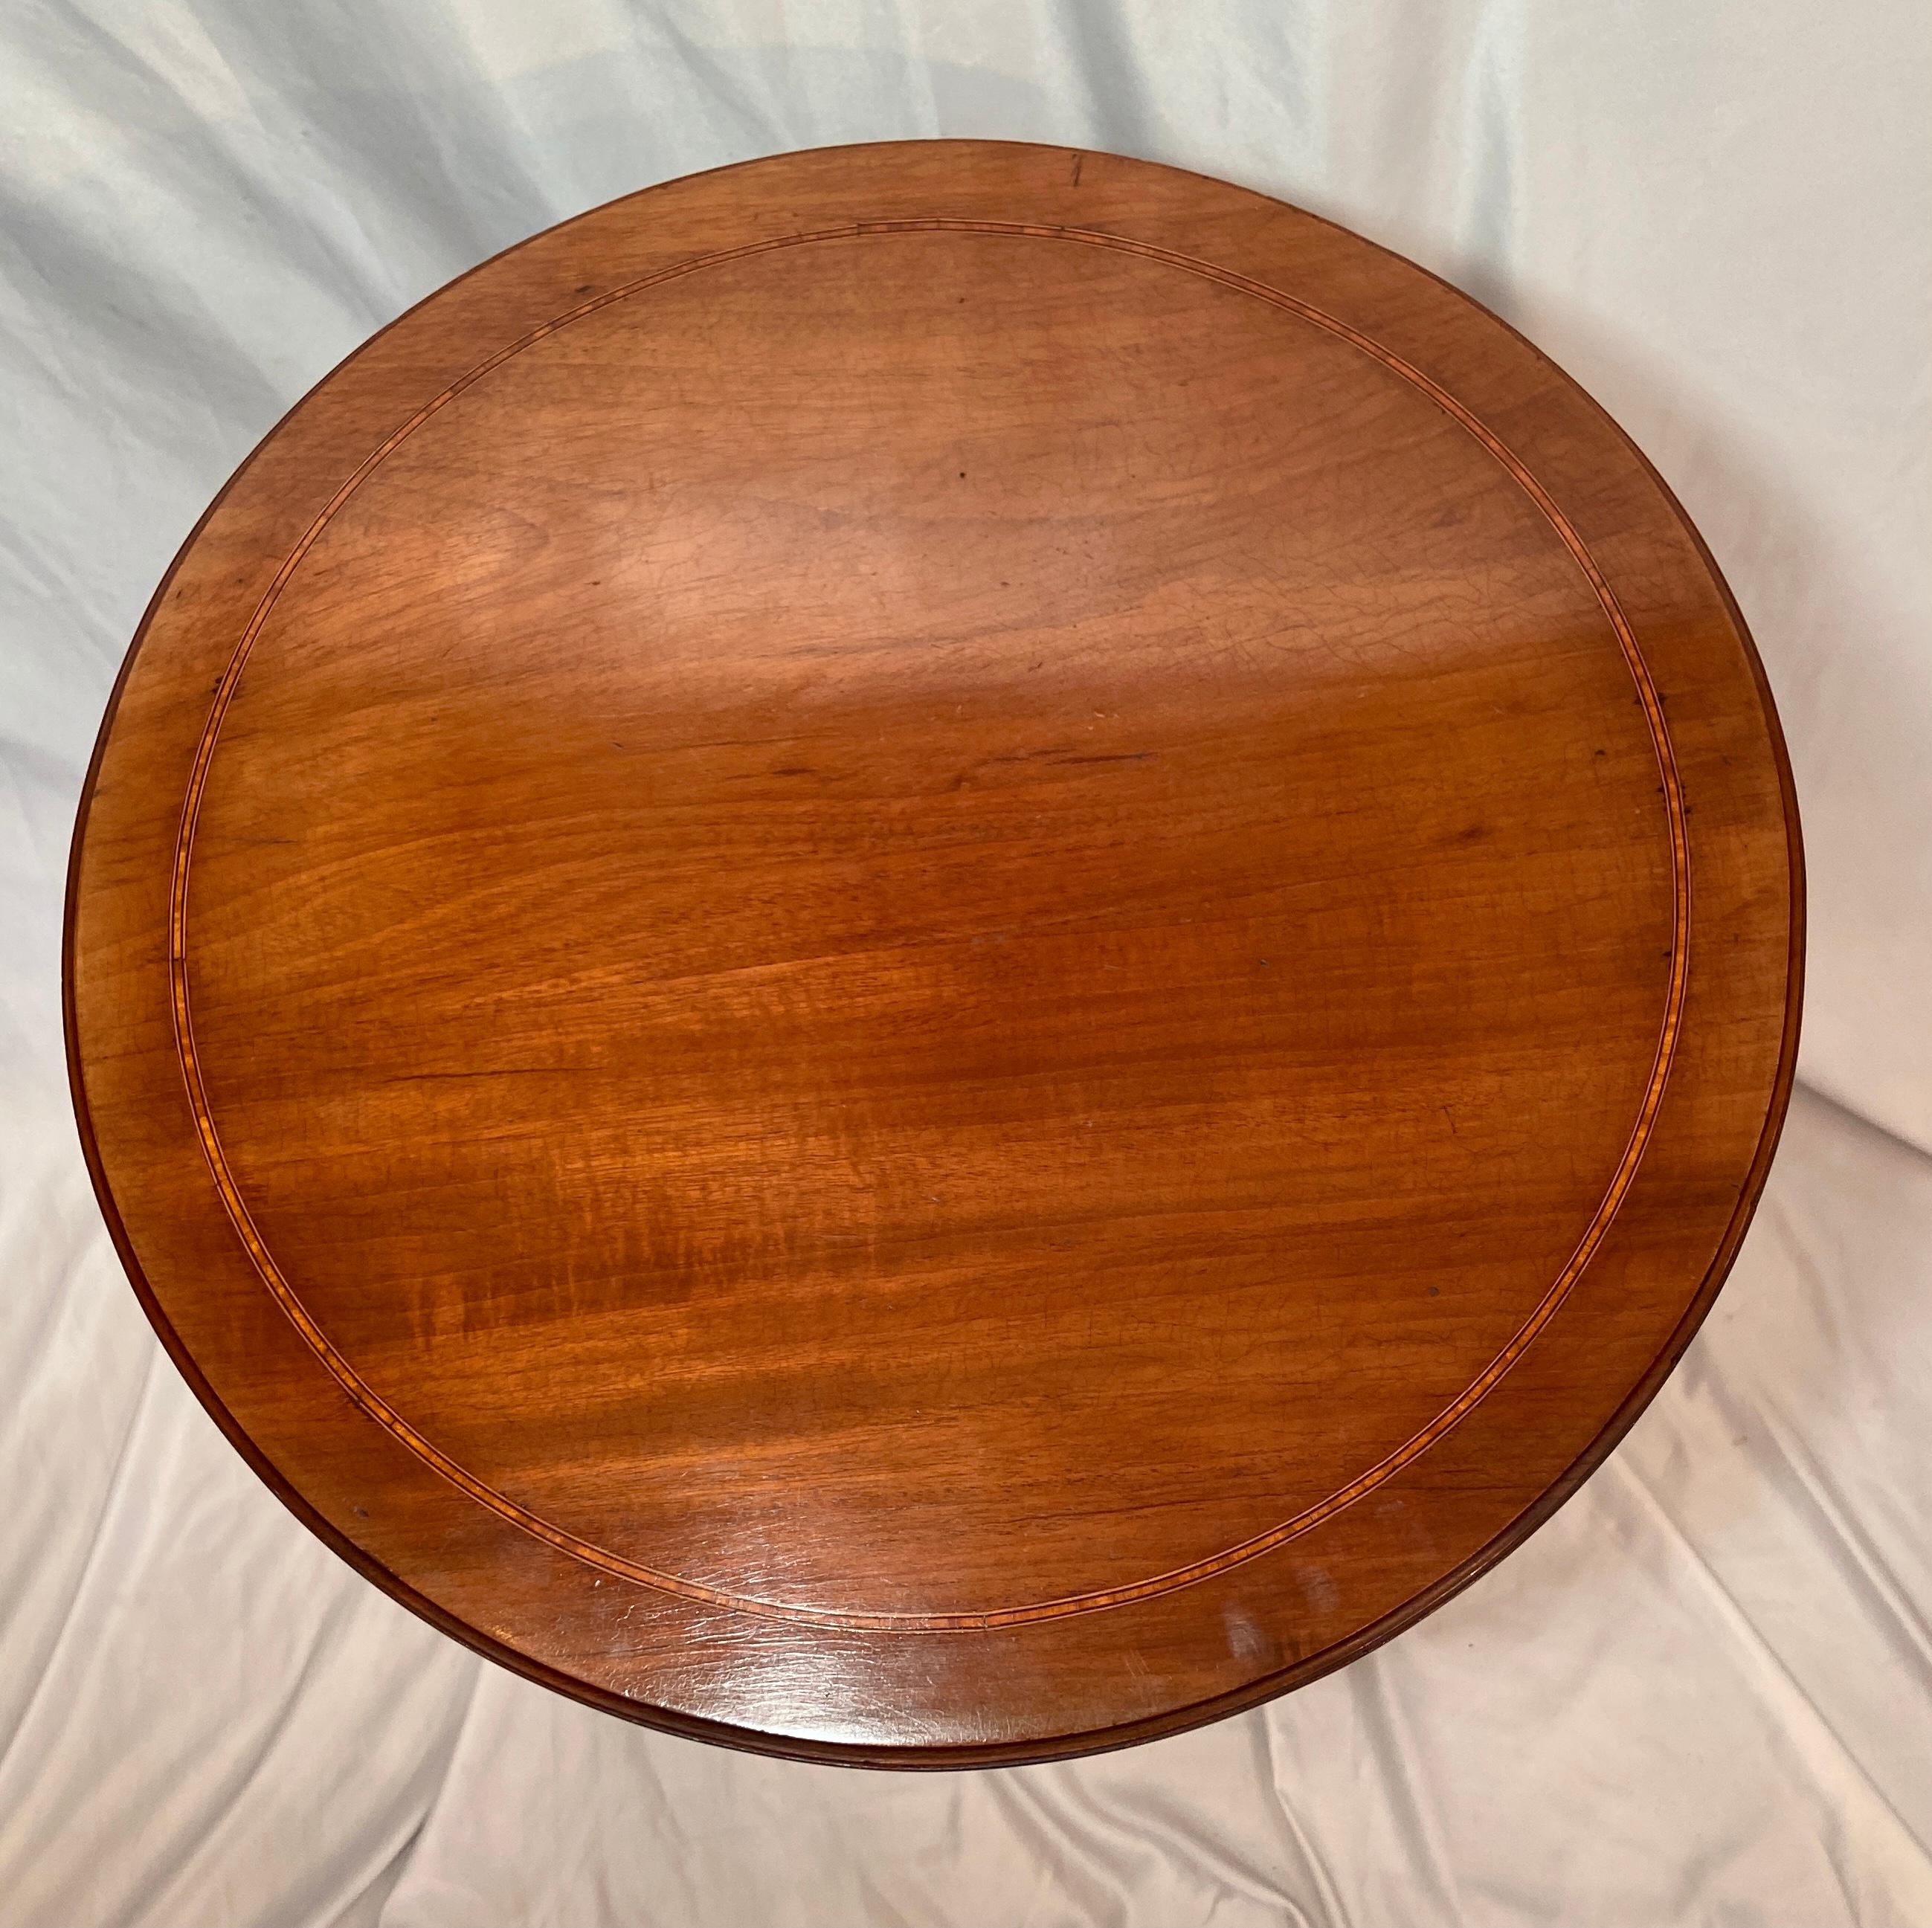 Antique English Mahogany Table with Satinwood Inlay, Circa 1880-1890 In Good Condition For Sale In New Orleans, LA